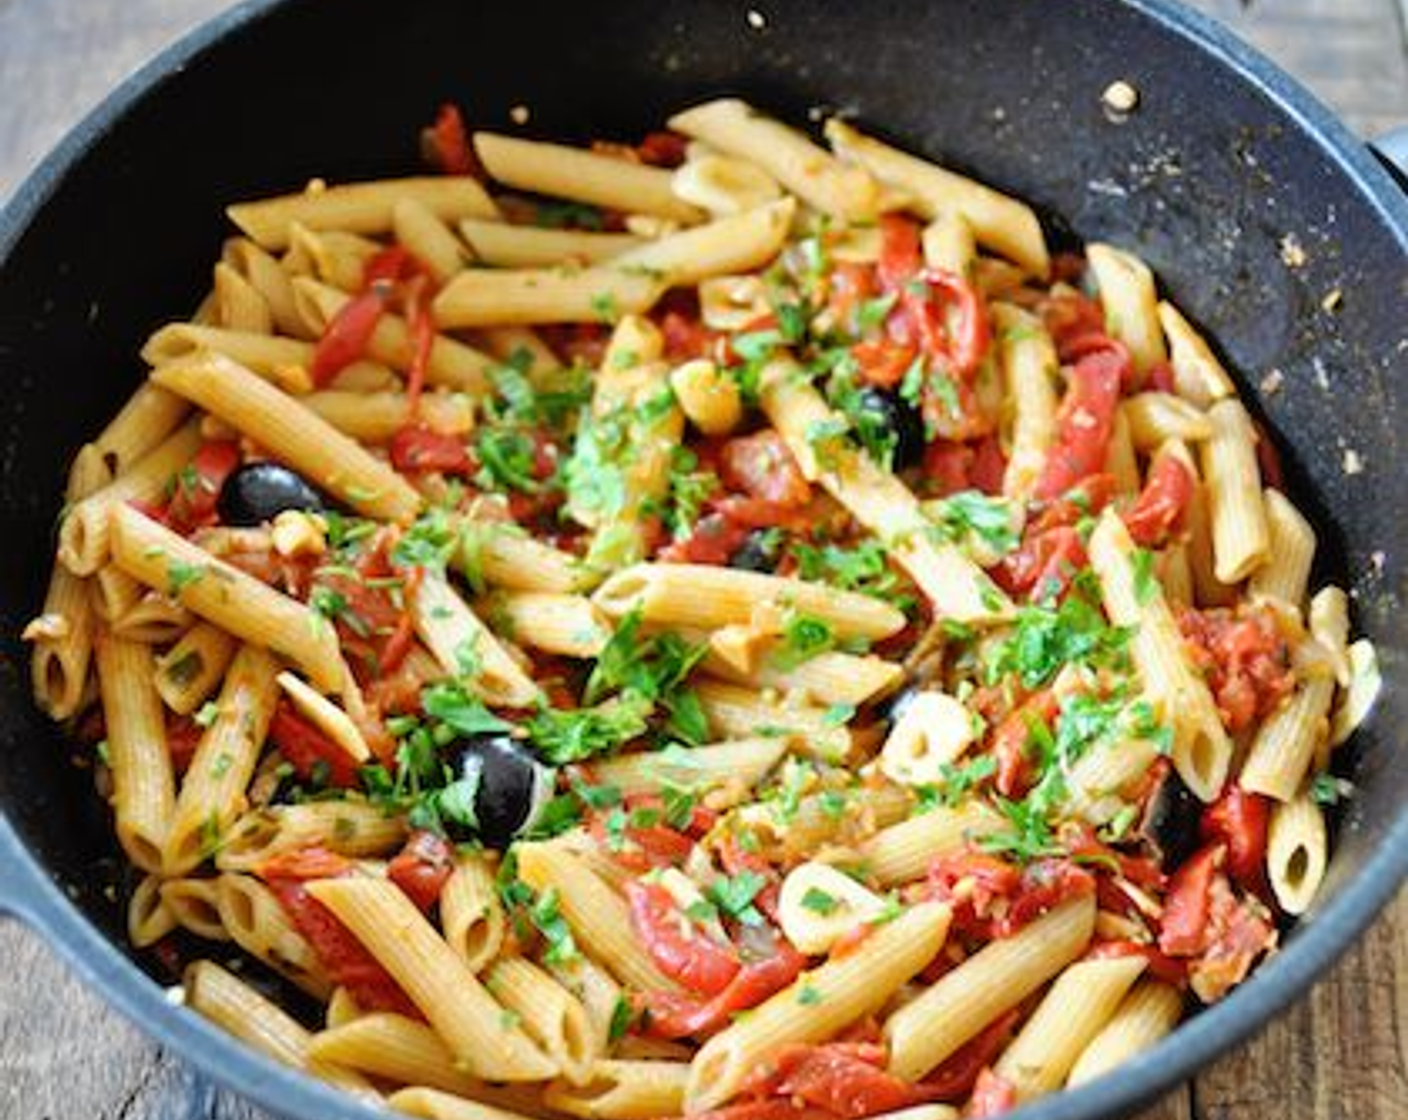 Spanish Pasta with Roasted Peppers and Almonds